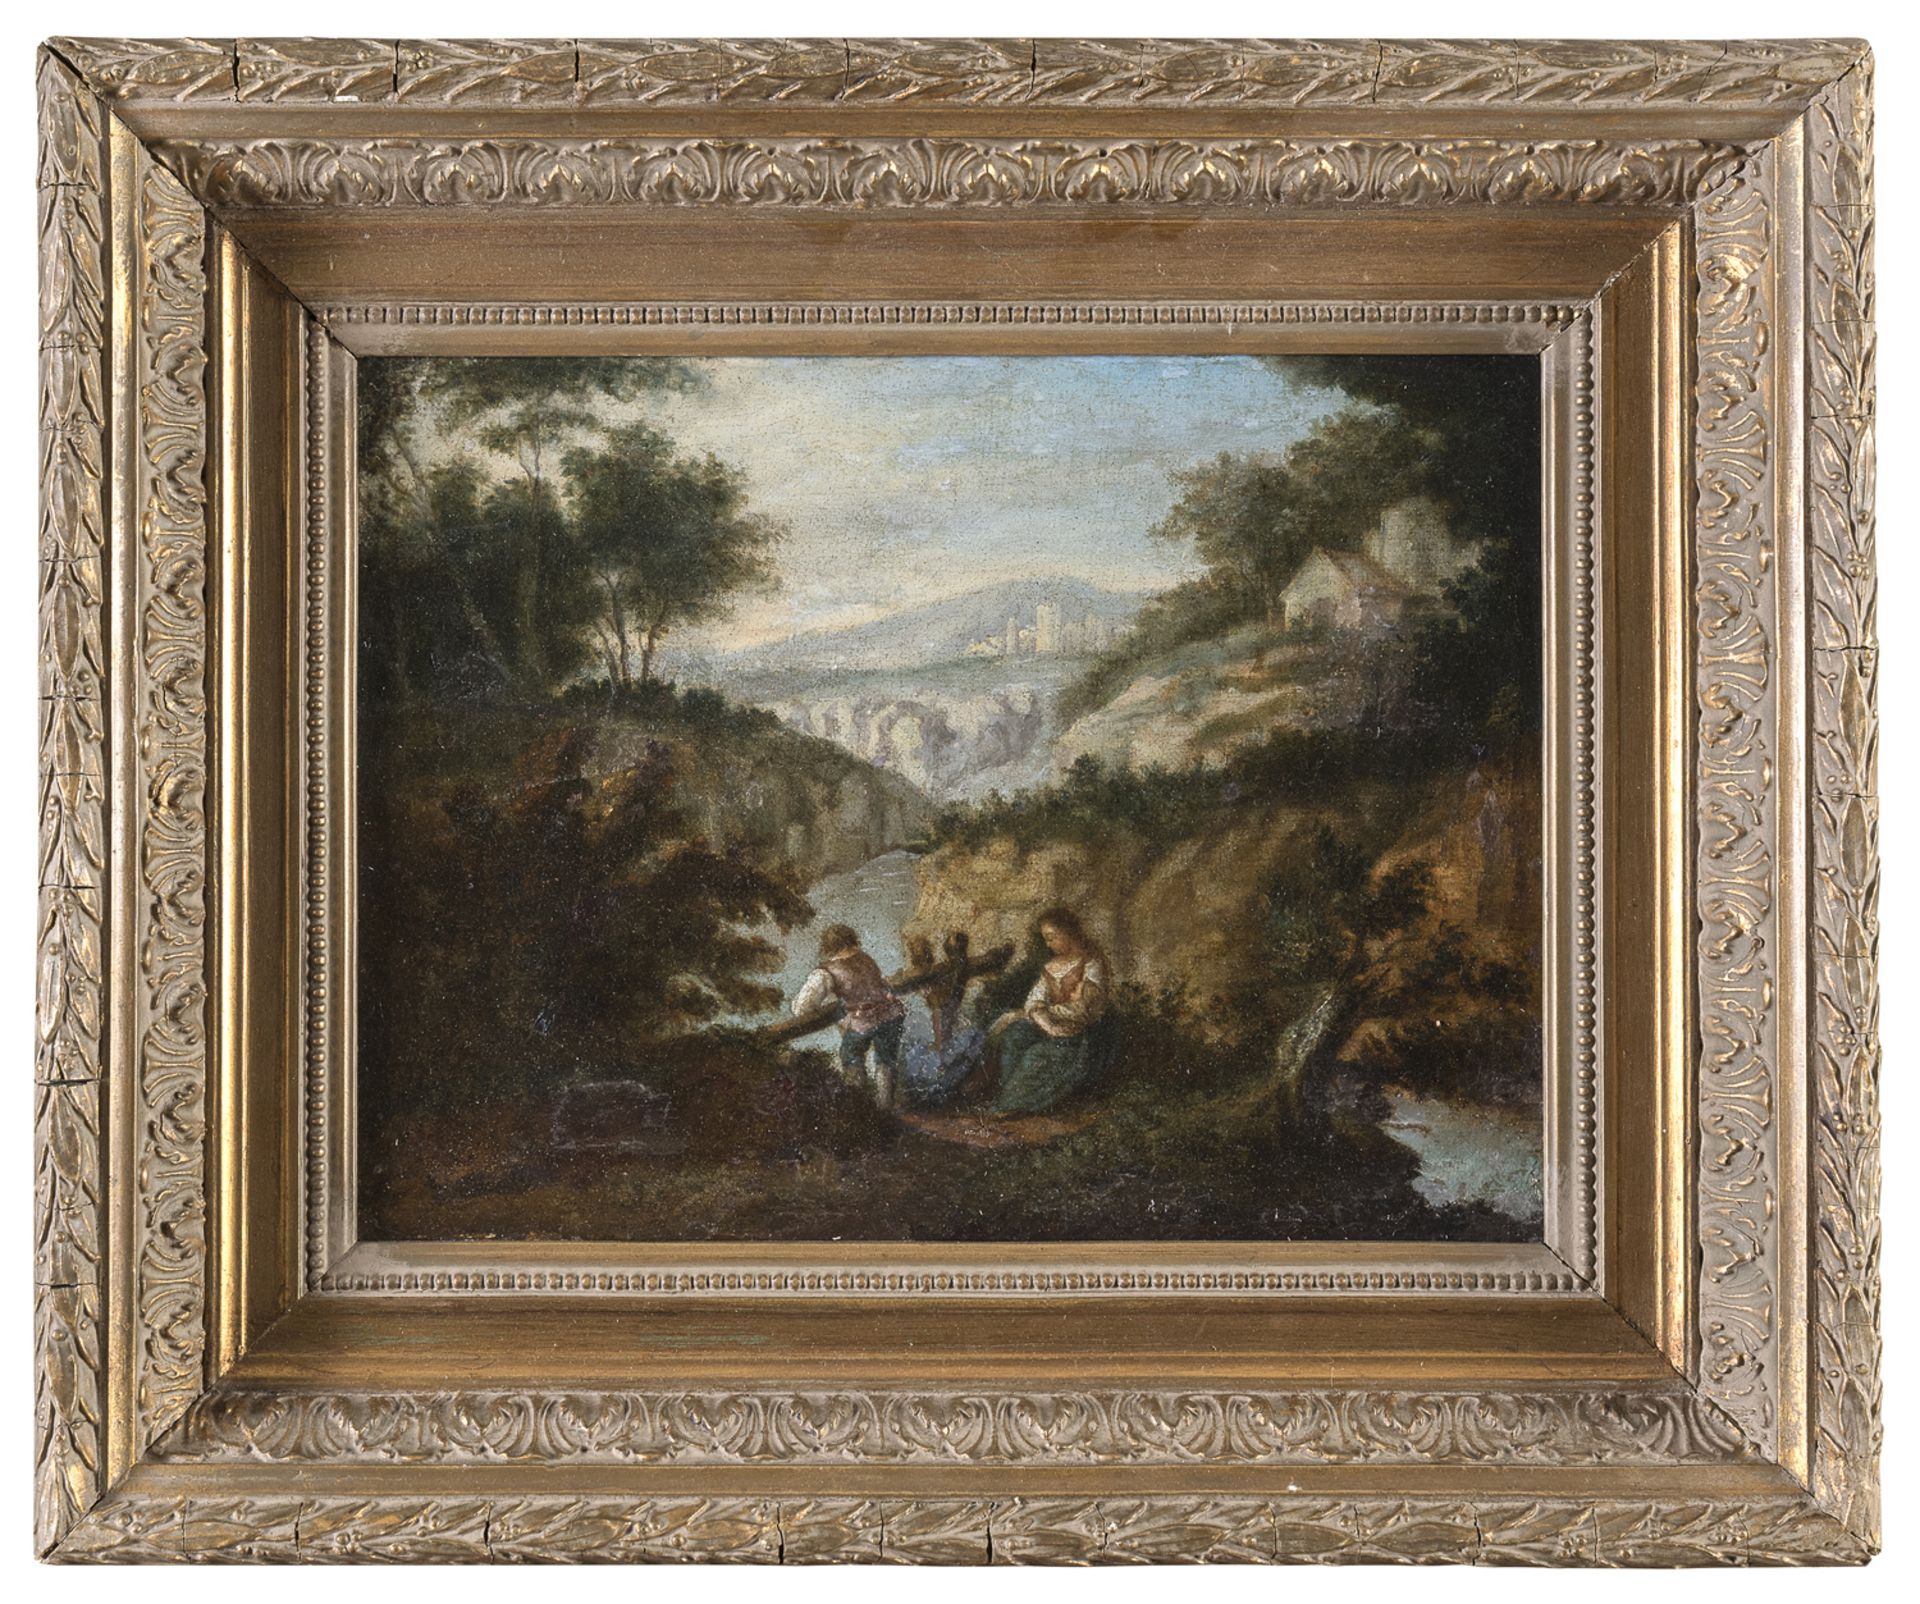 OIL PAINTING OF A RIVERSCAPE 18TH CENTURY